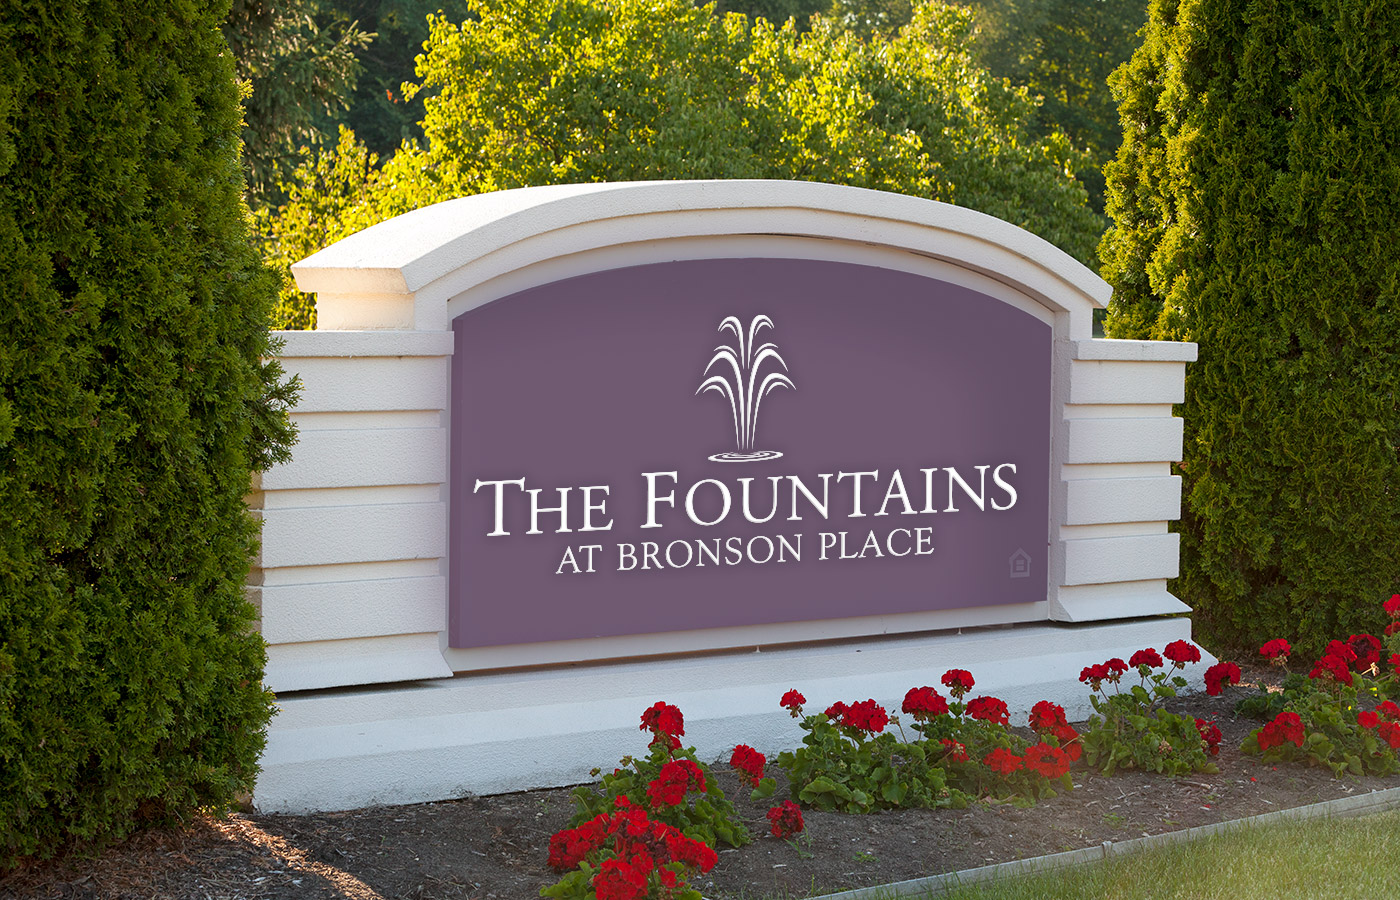 The Fountains at Bronson Place entrance sign outside